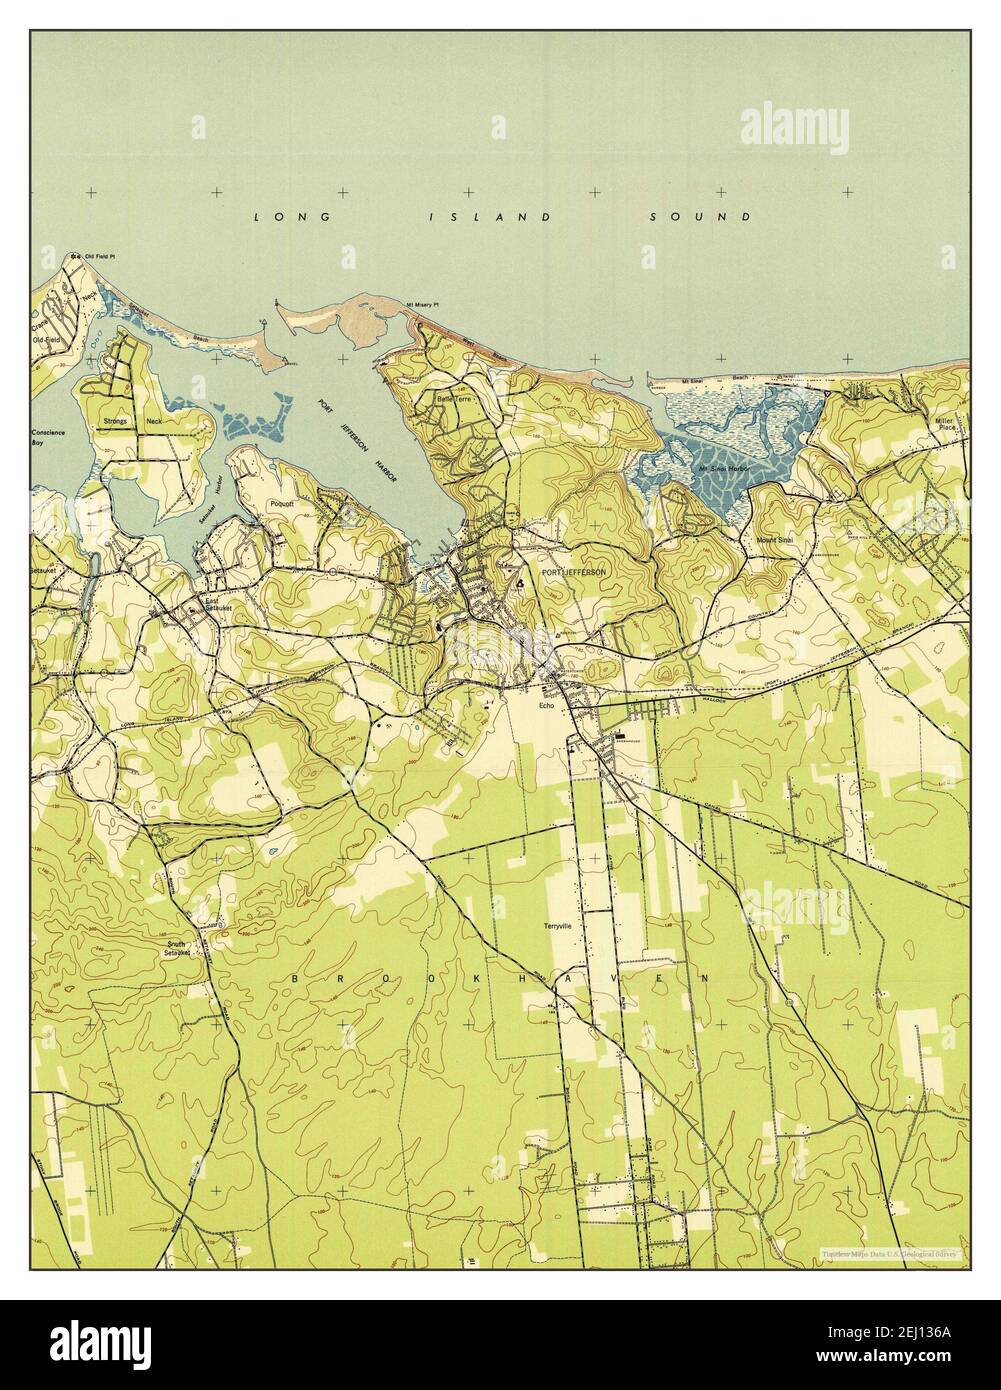 Port Jefferson, New York, map 1947, 1:24000, United States of America by Timeless Maps, data U.S. Geological Survey Stock Photo